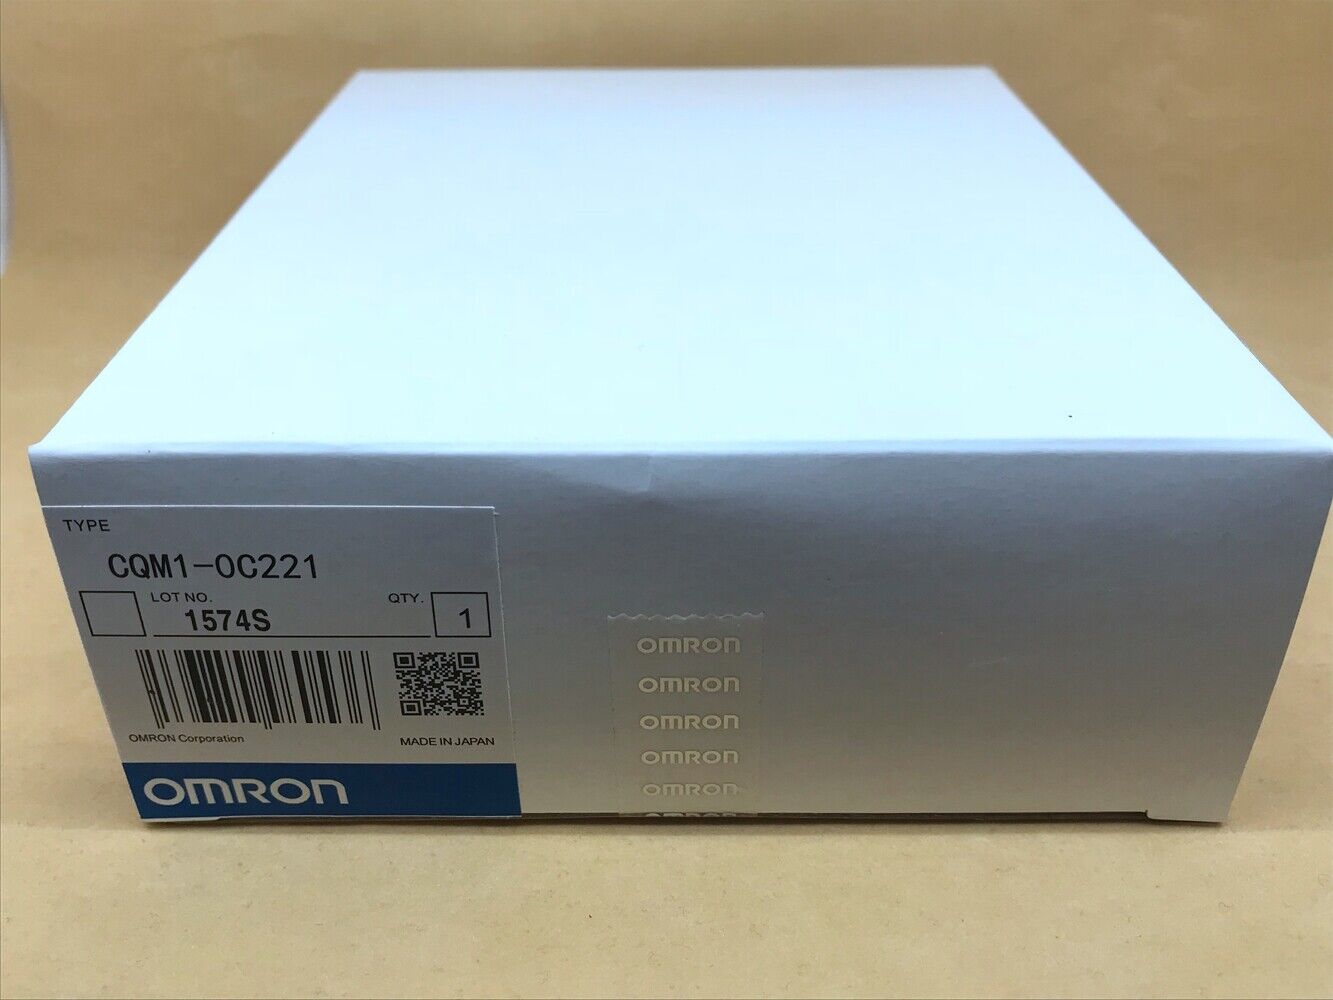 CQM1-OC221 OMRON PLC WITH ONE YEAR WARRANTY NEW IN BOX Expedited Shipping#HT